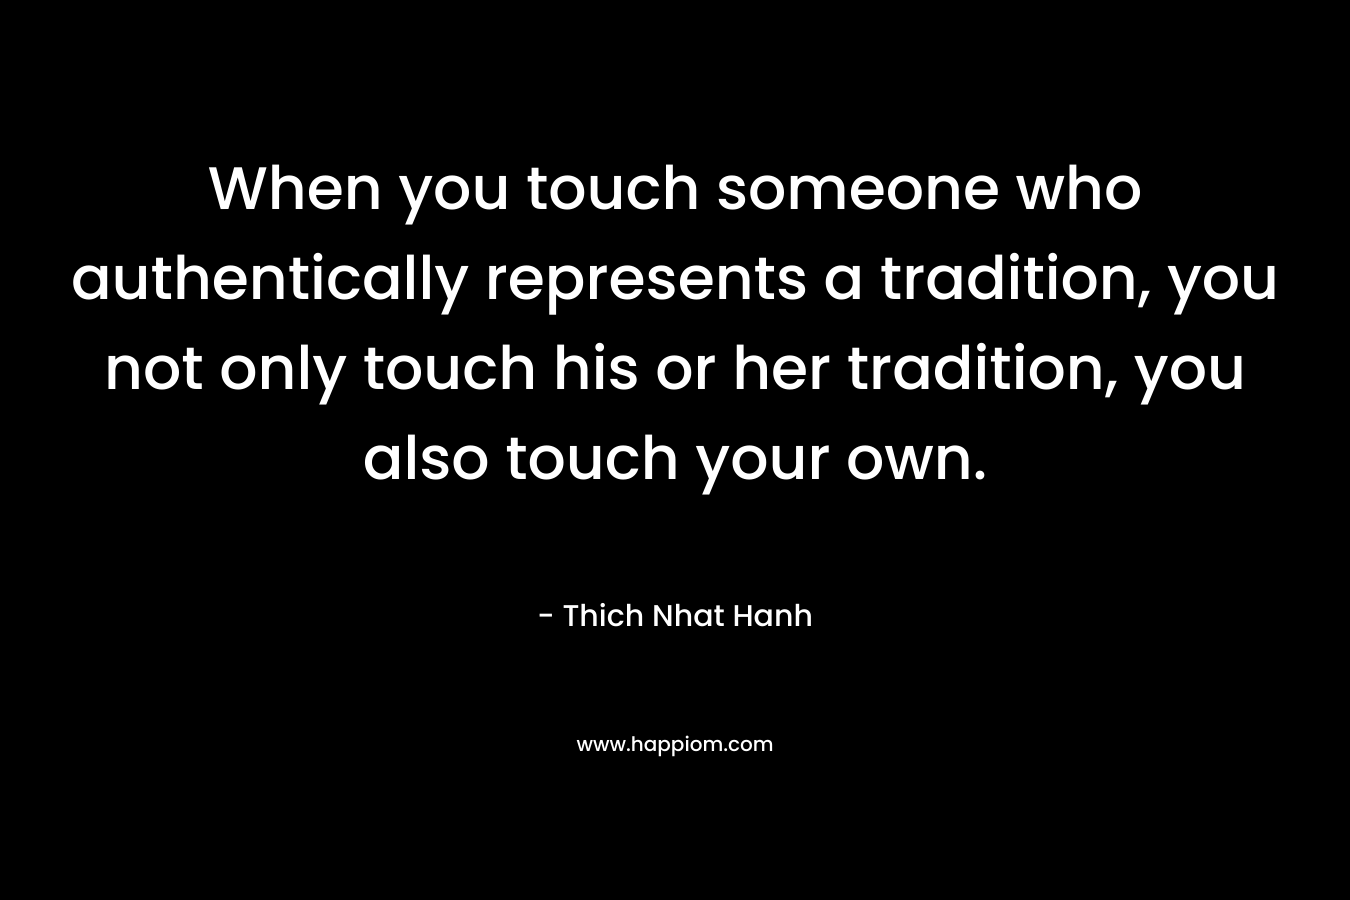 When you touch someone who authentically represents a tradition, you not only touch his or her tradition, you also touch your own.